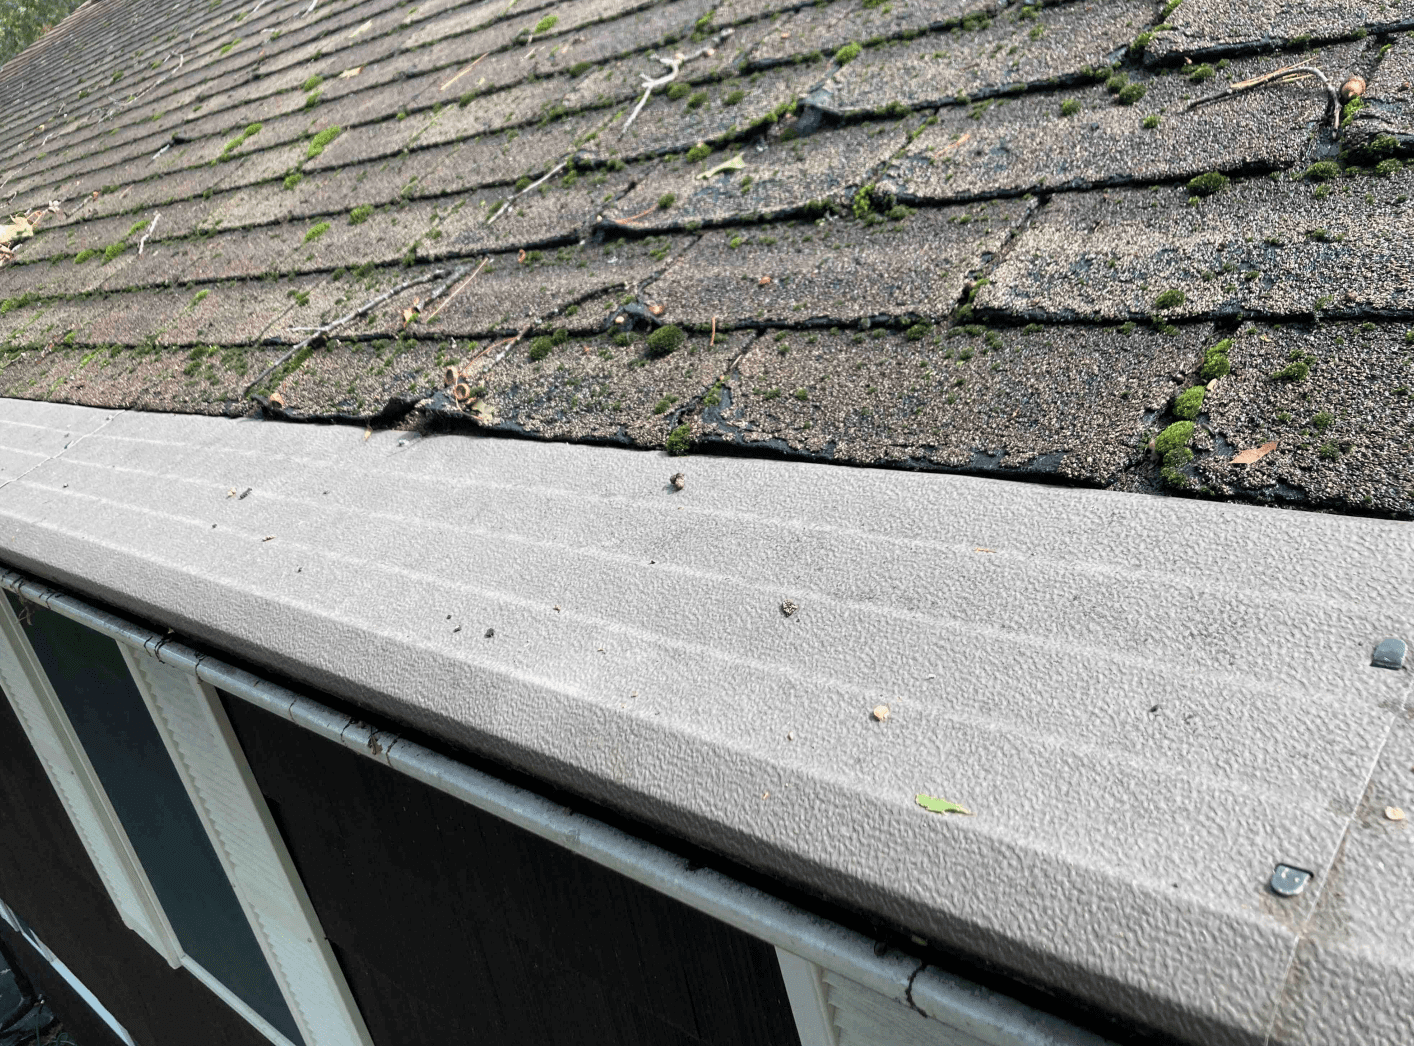 Crumbling asphalt shingles bordering the gutter cover. This is a recipe for disaster.